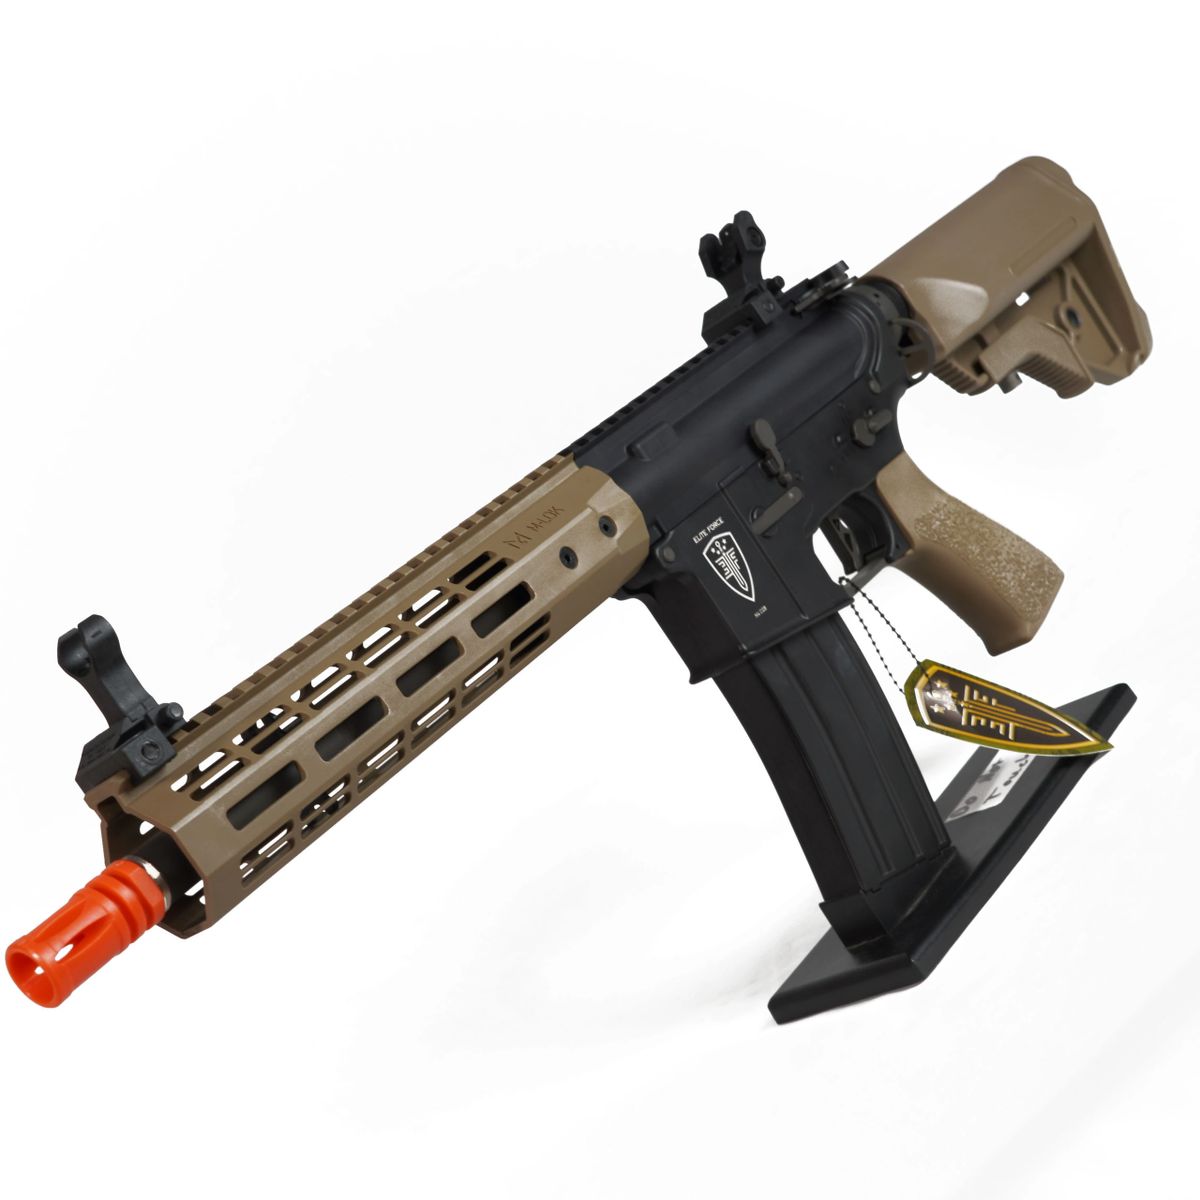 Elite Force Competition M4 AEG Airsoft rifle with M-lok